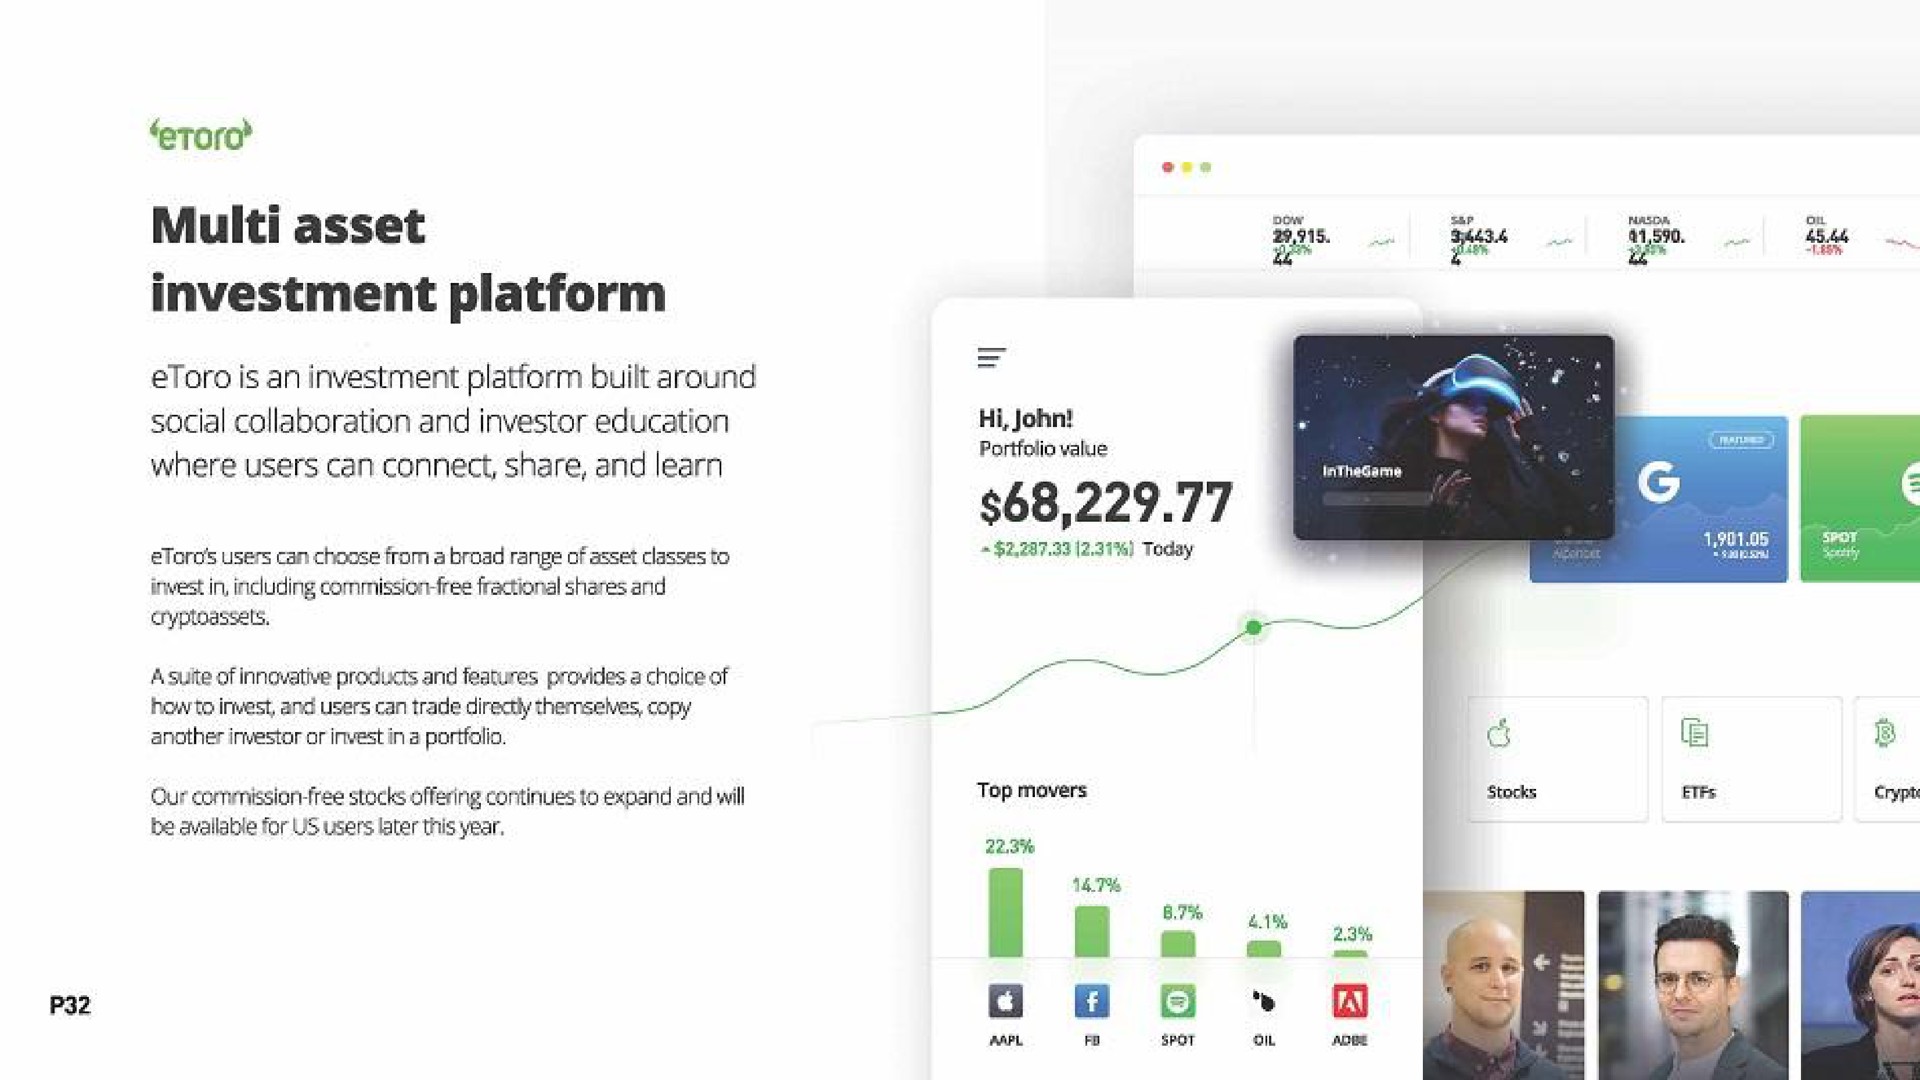 asset investment platform is an investment platform built around social collaboration and investor education where users can connect share and learn i | eToro